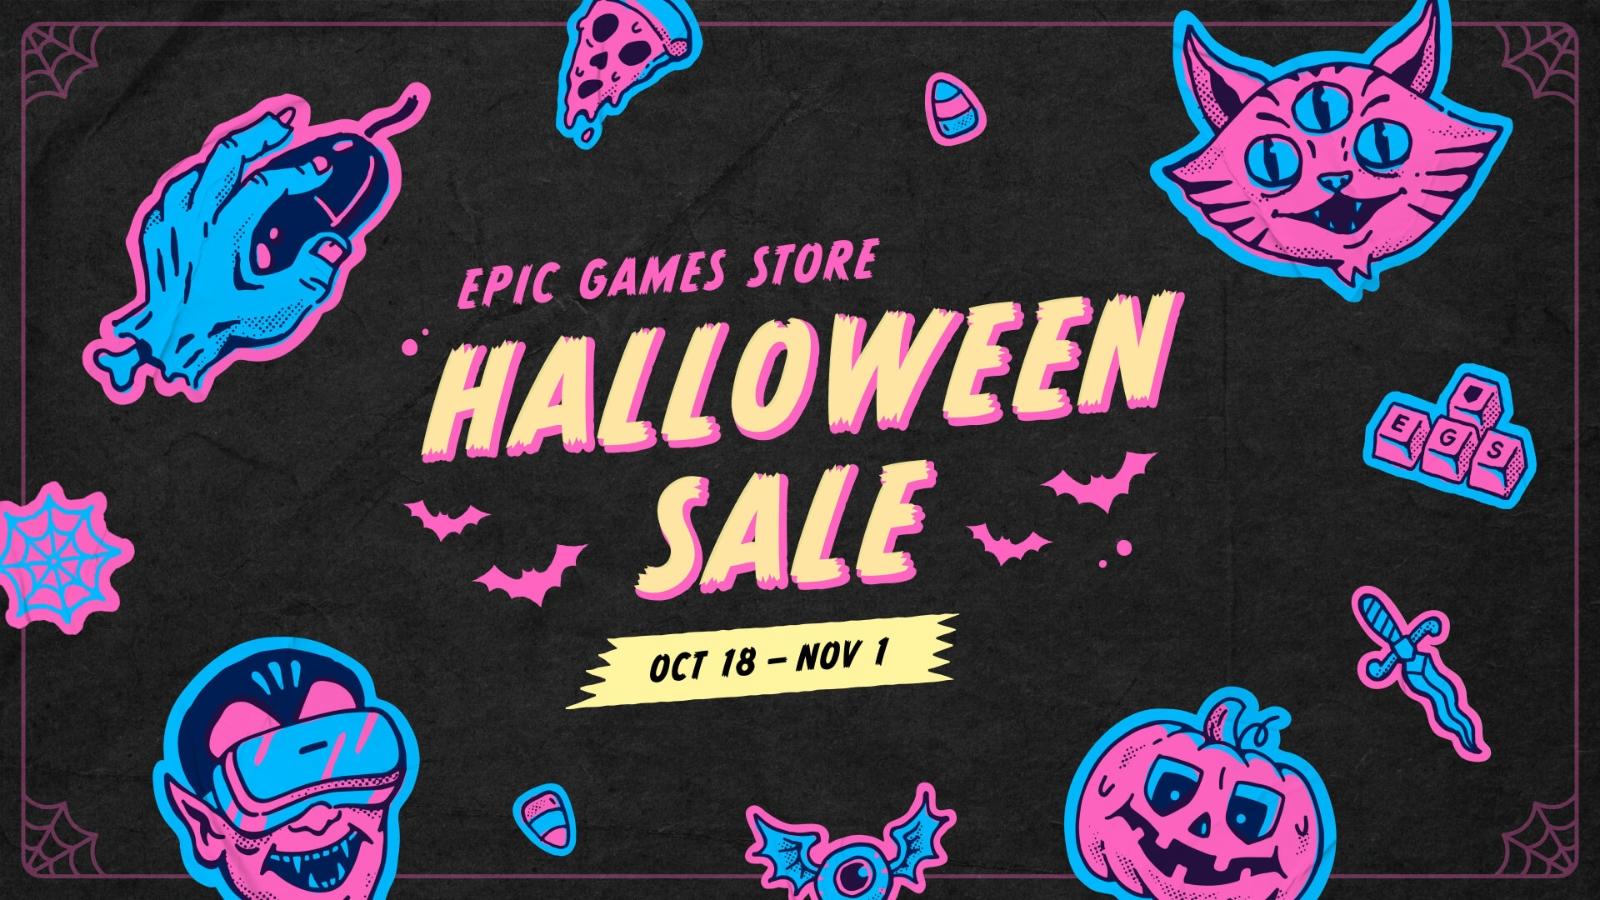 Epic Games Store Makes 2 Horror Games Free for Halloween